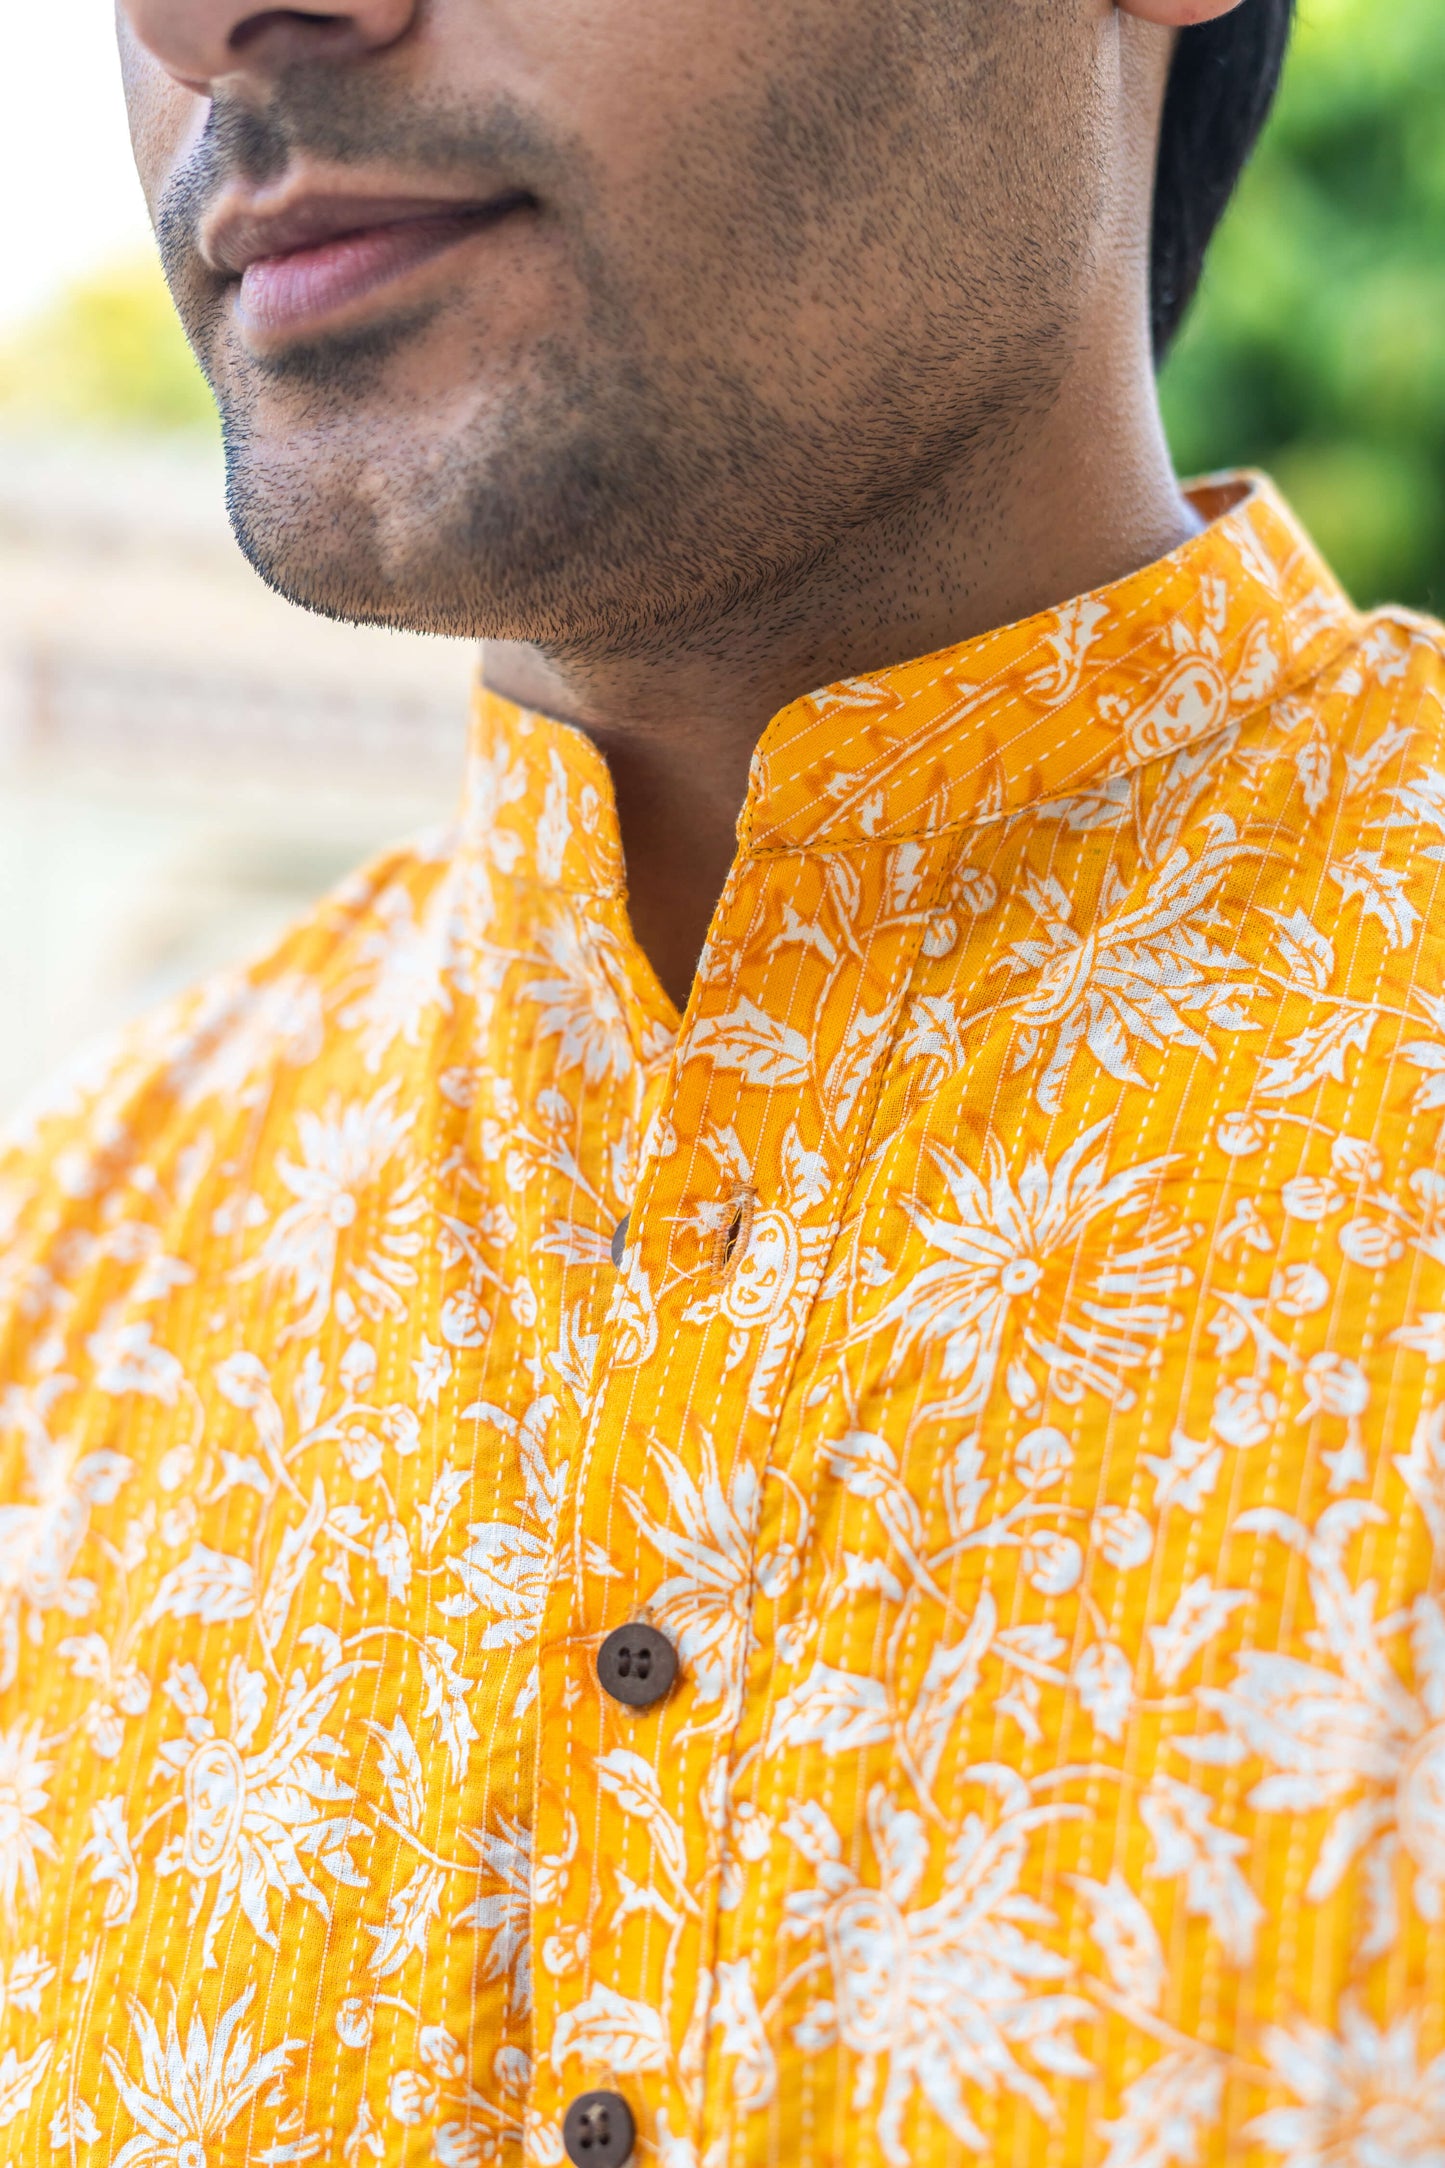 The Yellow Kantha Work Short Kurta With All-Over Floral Print